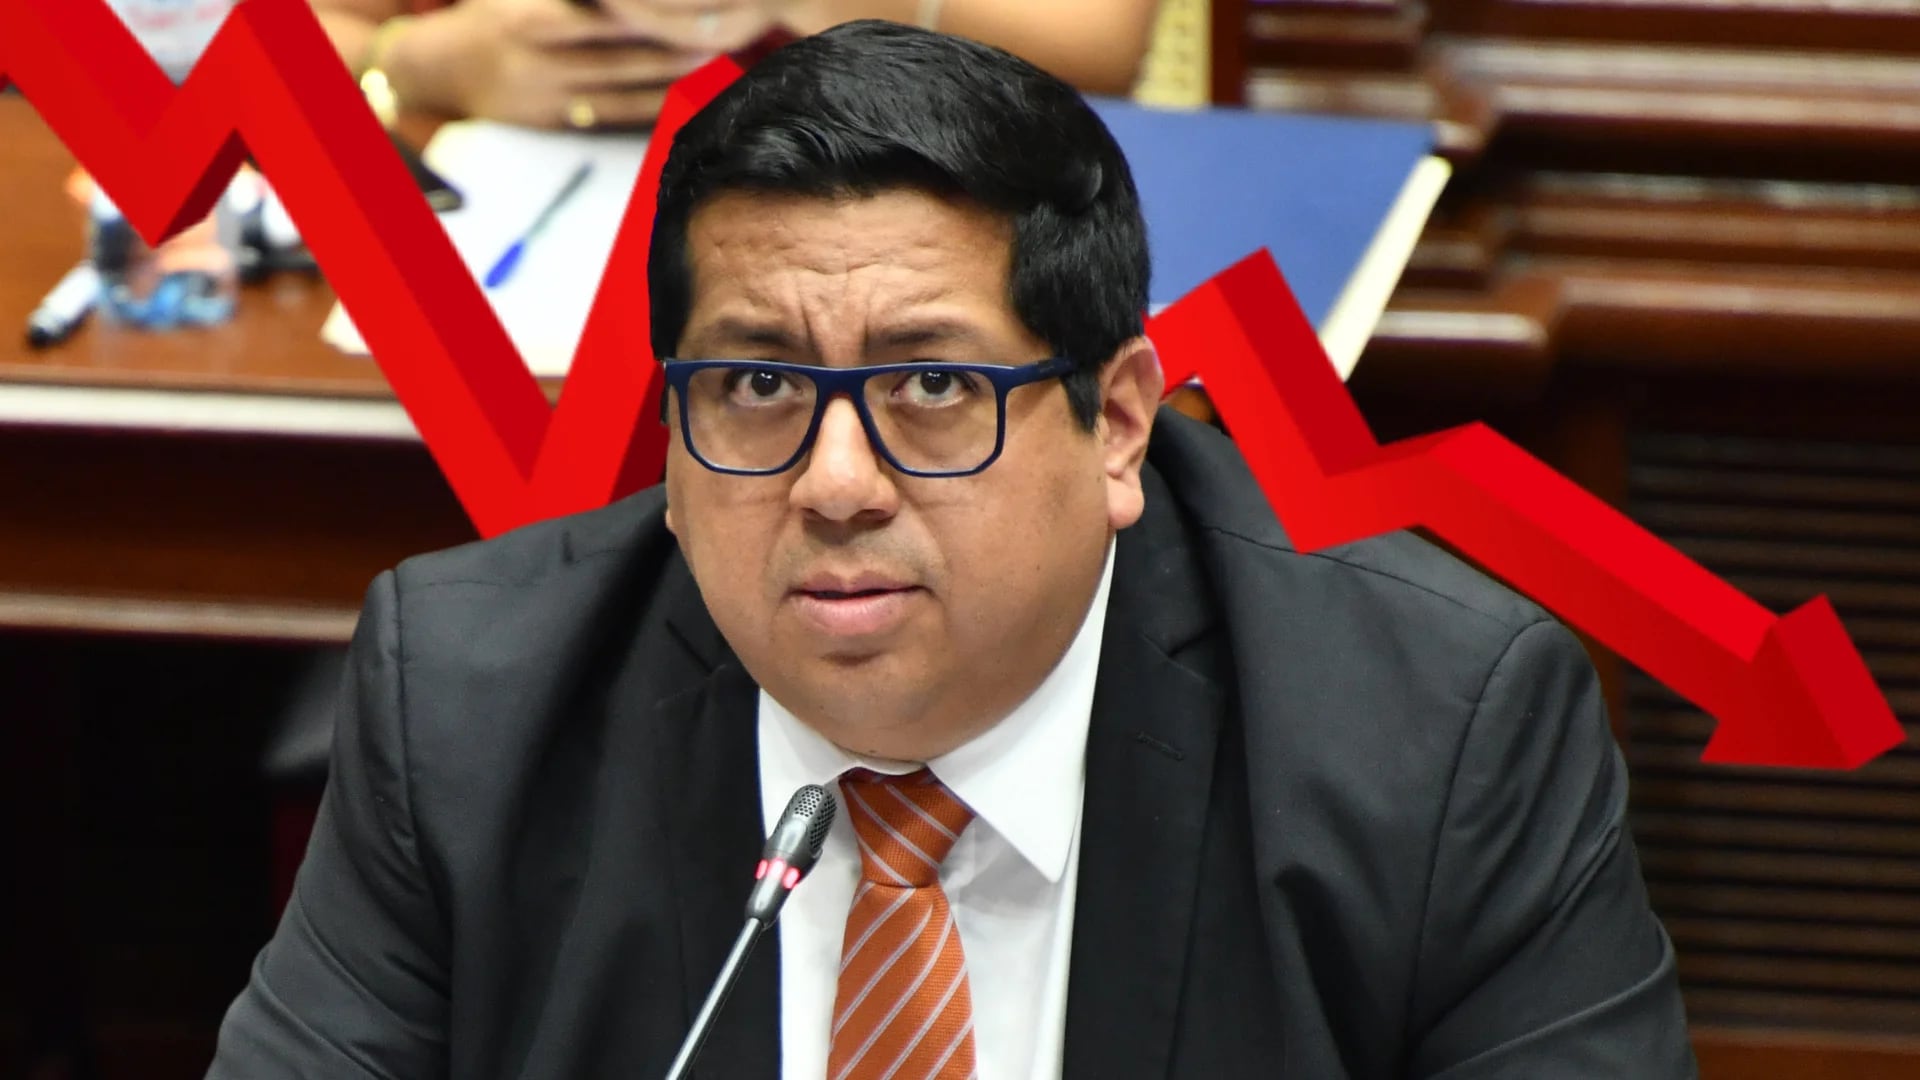 Alex Contreras' approval rating has dropped in the last two months.  - Infobae Peru/MEF Composition Credit